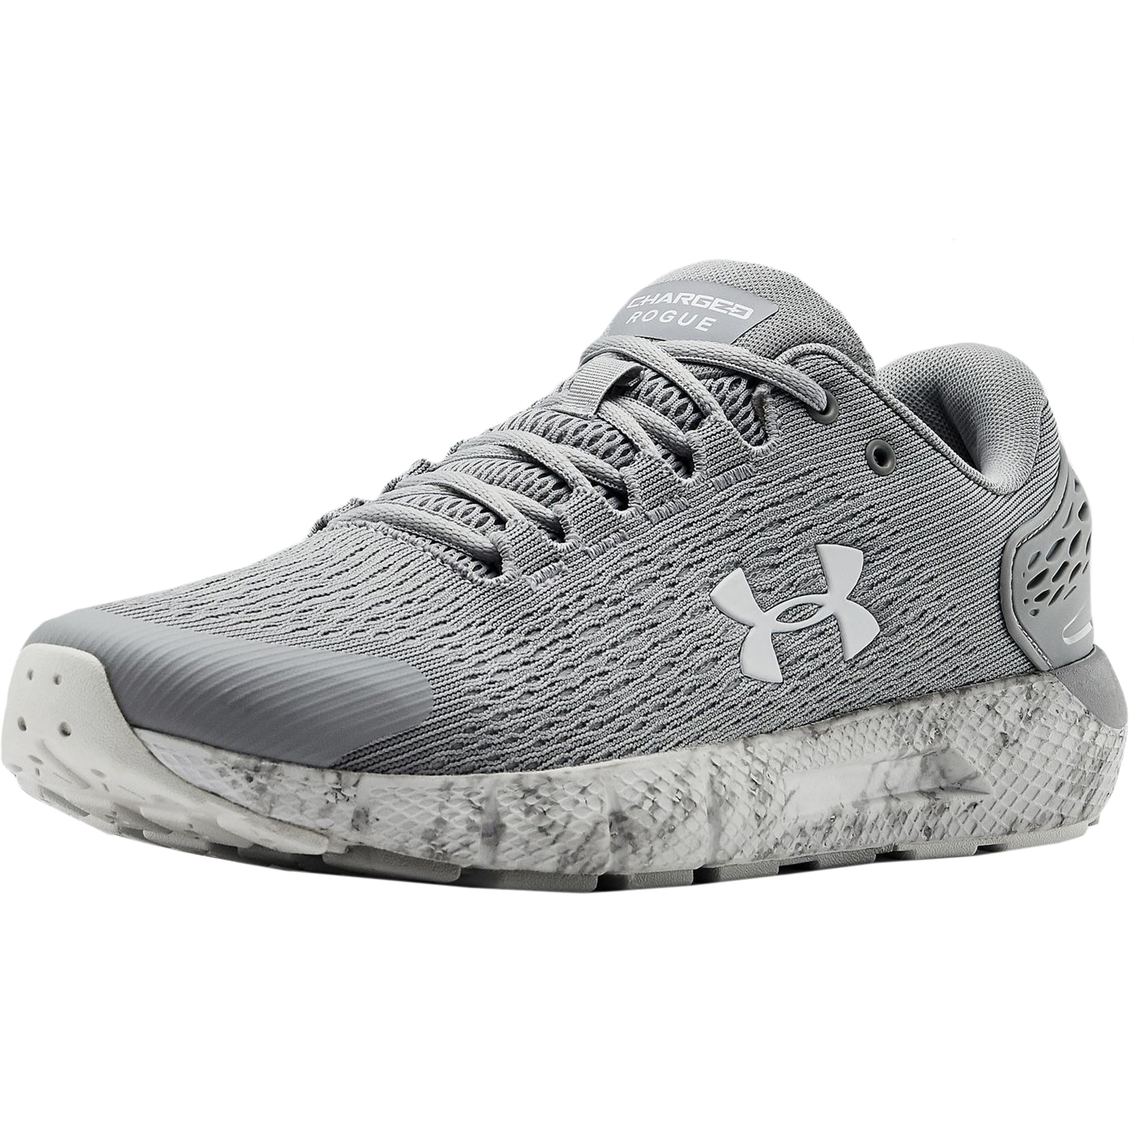 ua charged running shoes